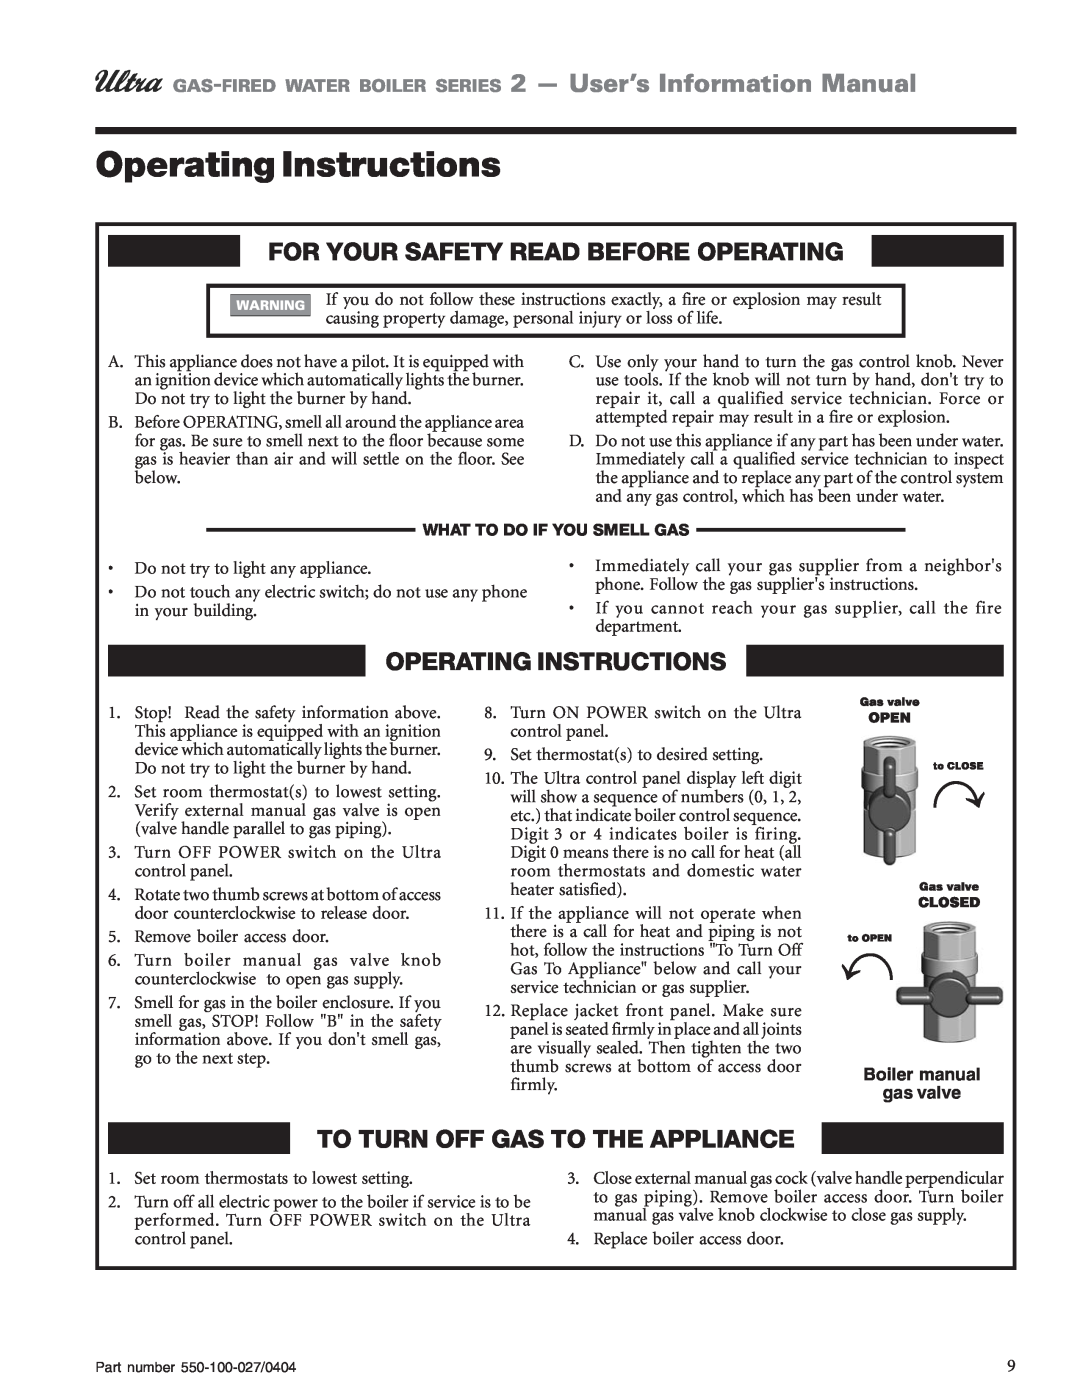 Weil-McLain Series 2 manual Operating Instructions, For Your Safety Read Before Operating, To Turn Off Gas To The Appliance 